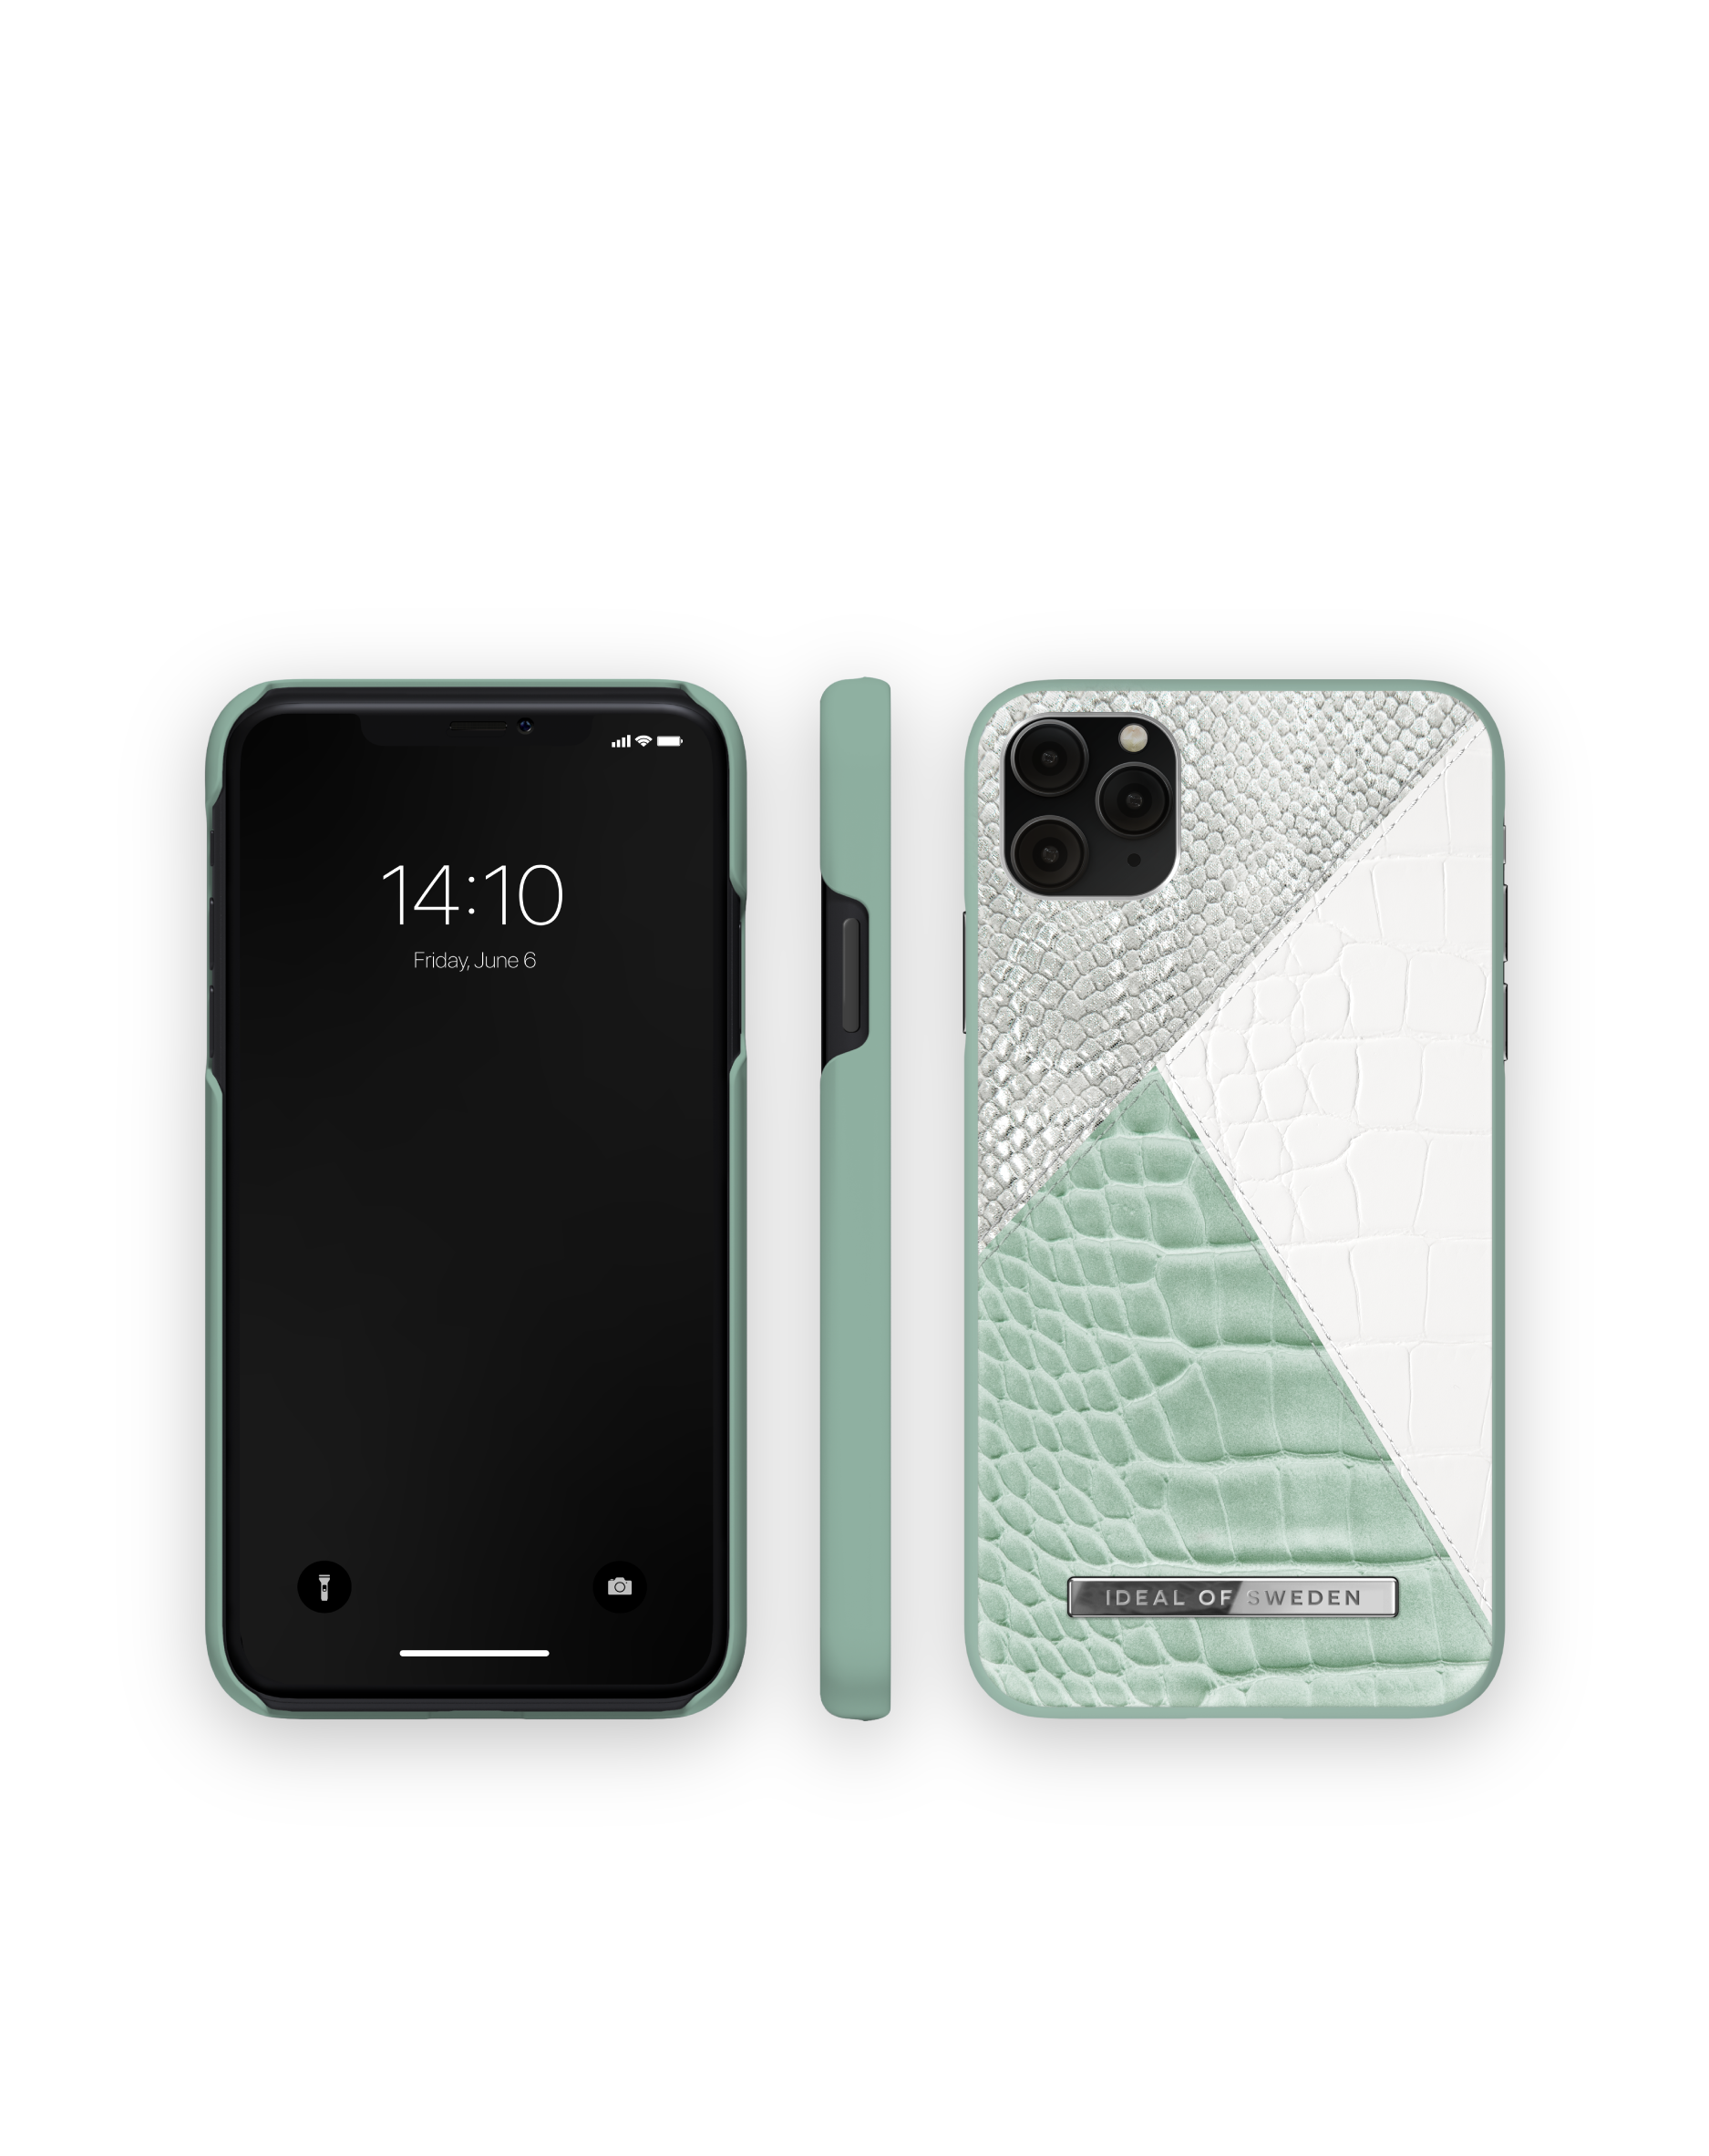 IDEAL OF Apple, Backcover, Mint Palladian Apple IDACSS21-I1965-268, XS 11 Max, SWEDEN iPhone Max, Pro iPhone Apple Snake